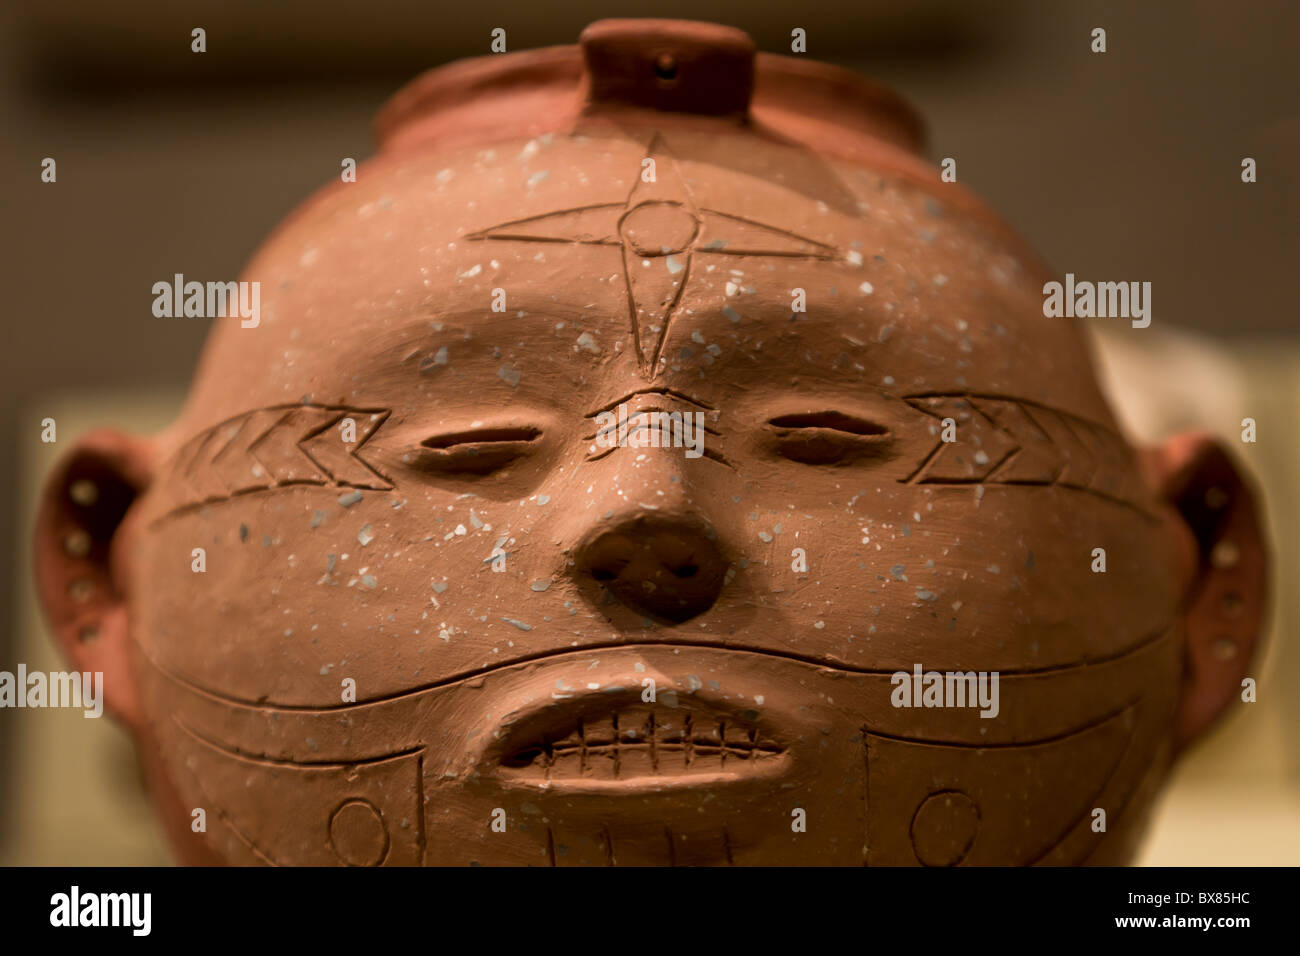 Mississippian period head pot showing early Native American tattoo variations at Cahokia Mounds State Historic Site, Illinois. Stock Photo